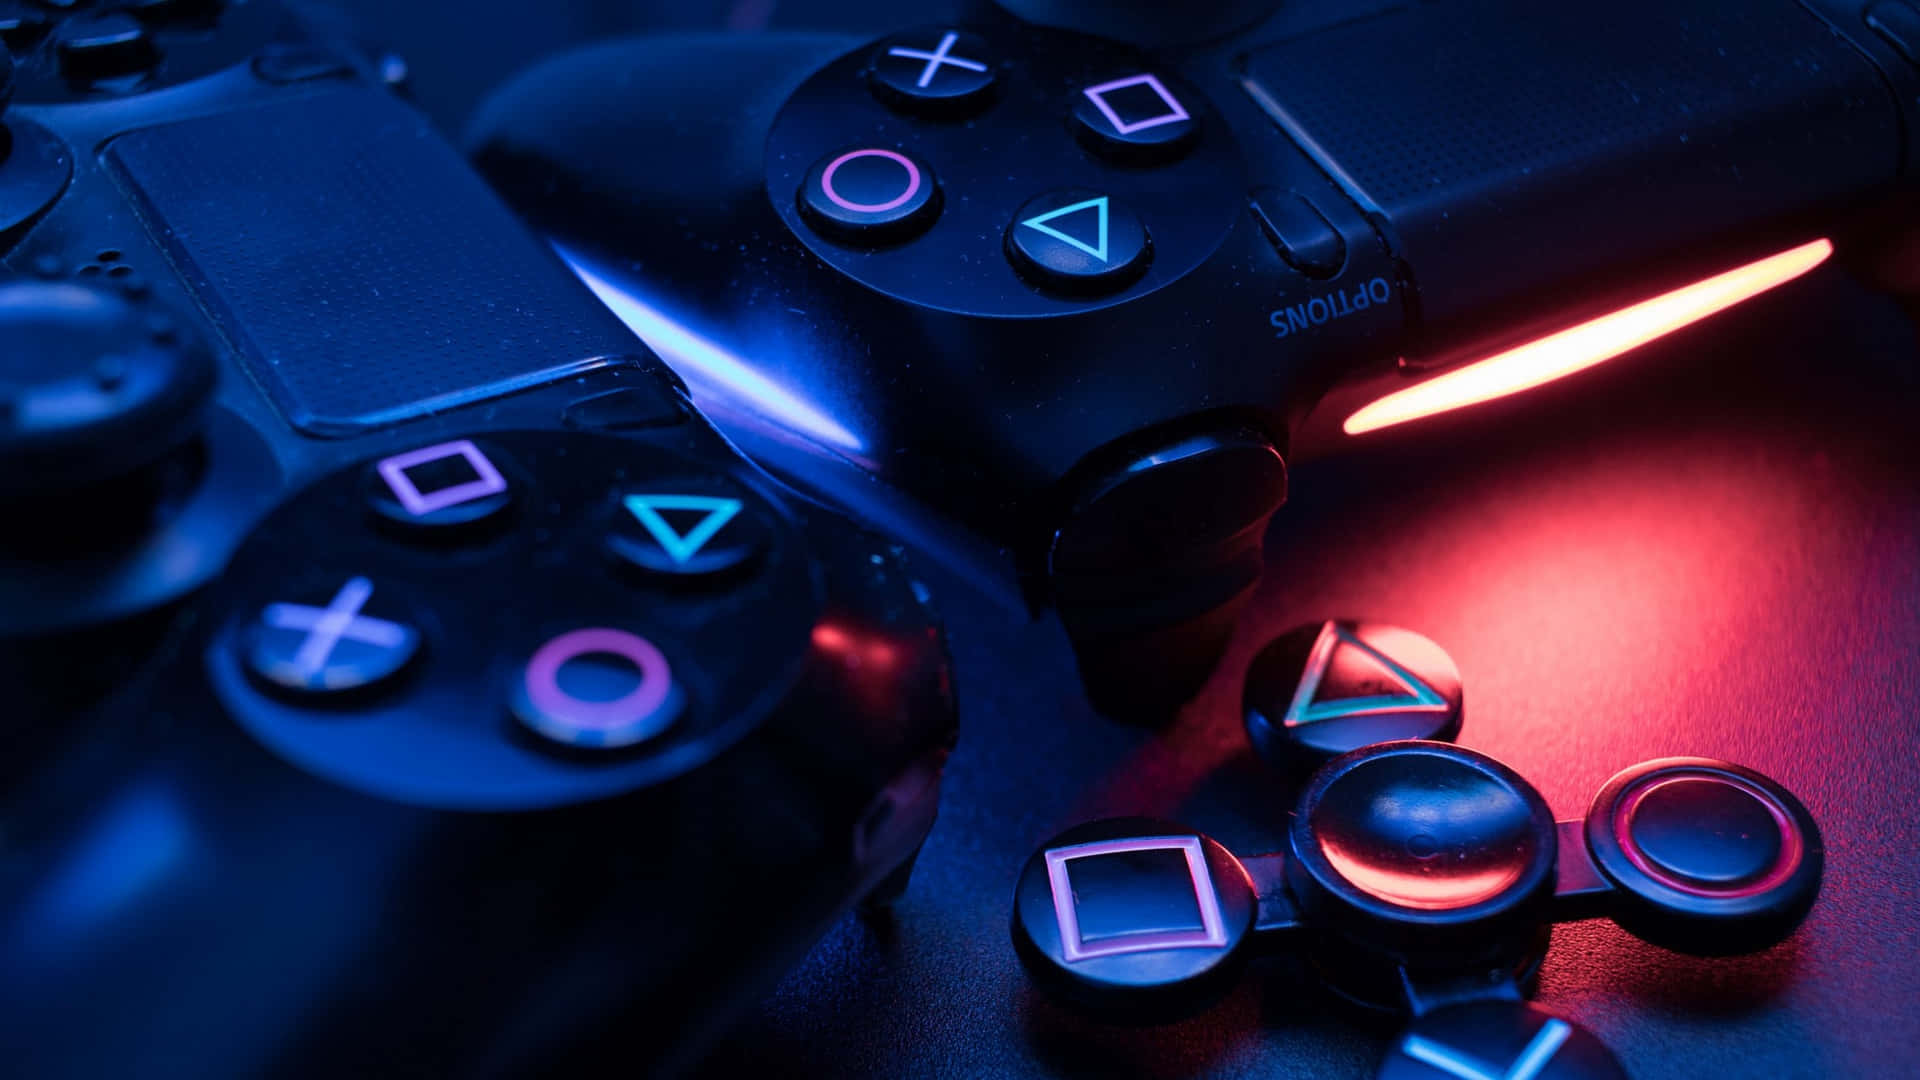 Sony Playstation 4 Remote Control Light Wallpaper